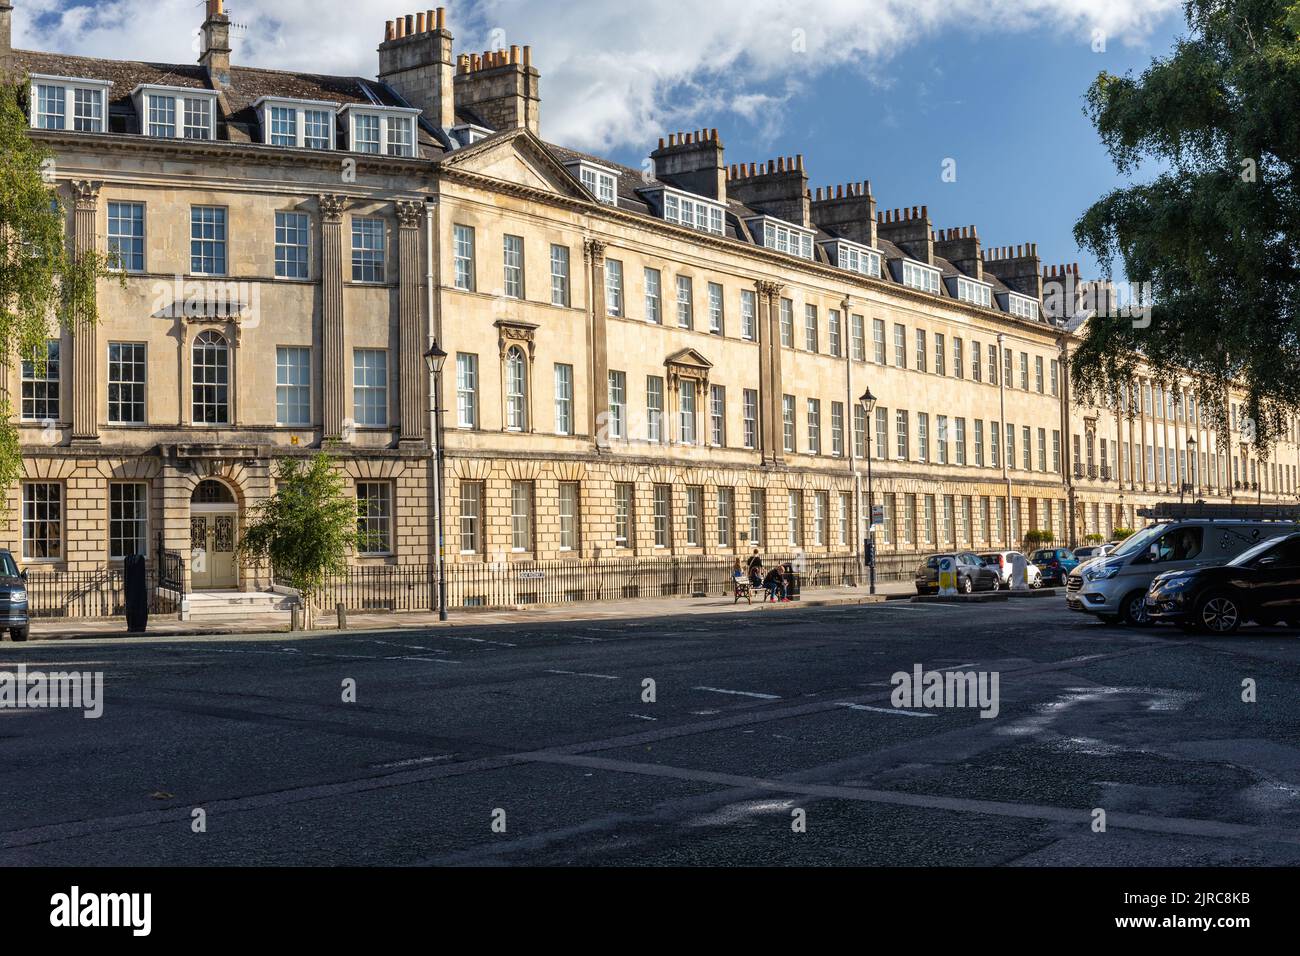 Great Pulteney Street and its sunlit terrace Georgian period townhouses, City of Bath, Somerset, England, UK Stock Photo